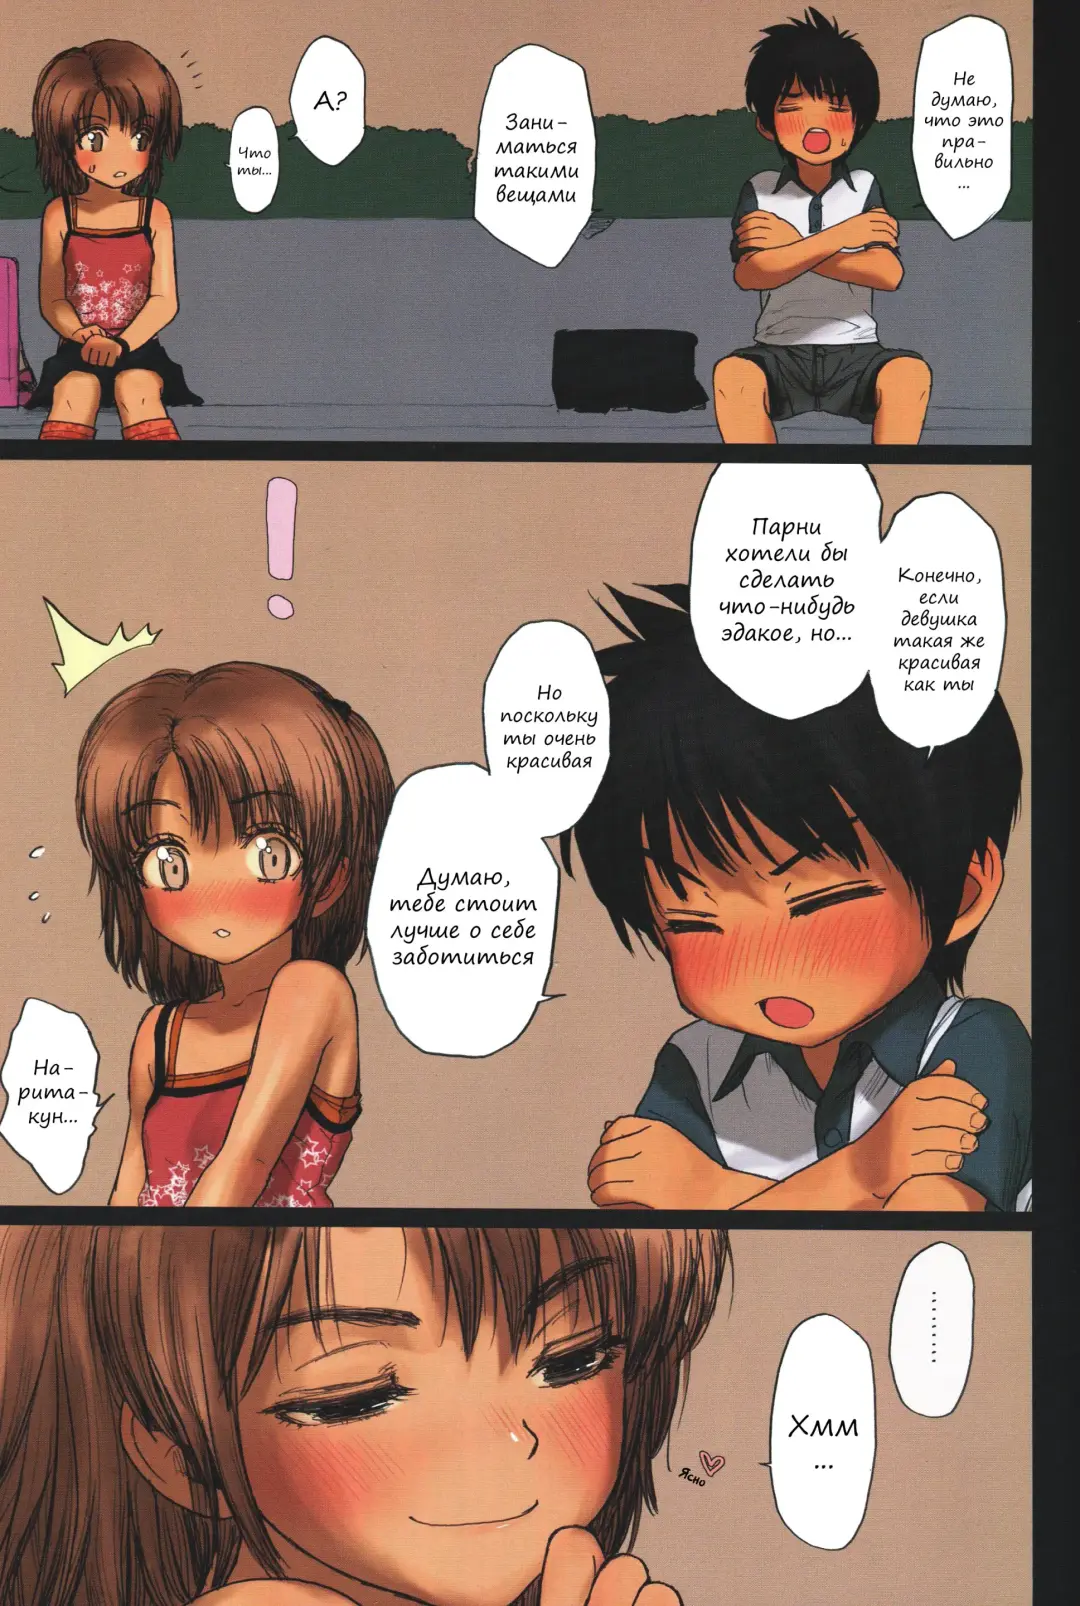 [Rustle] Lolicon Special 5 Fhentai.net - Page 8